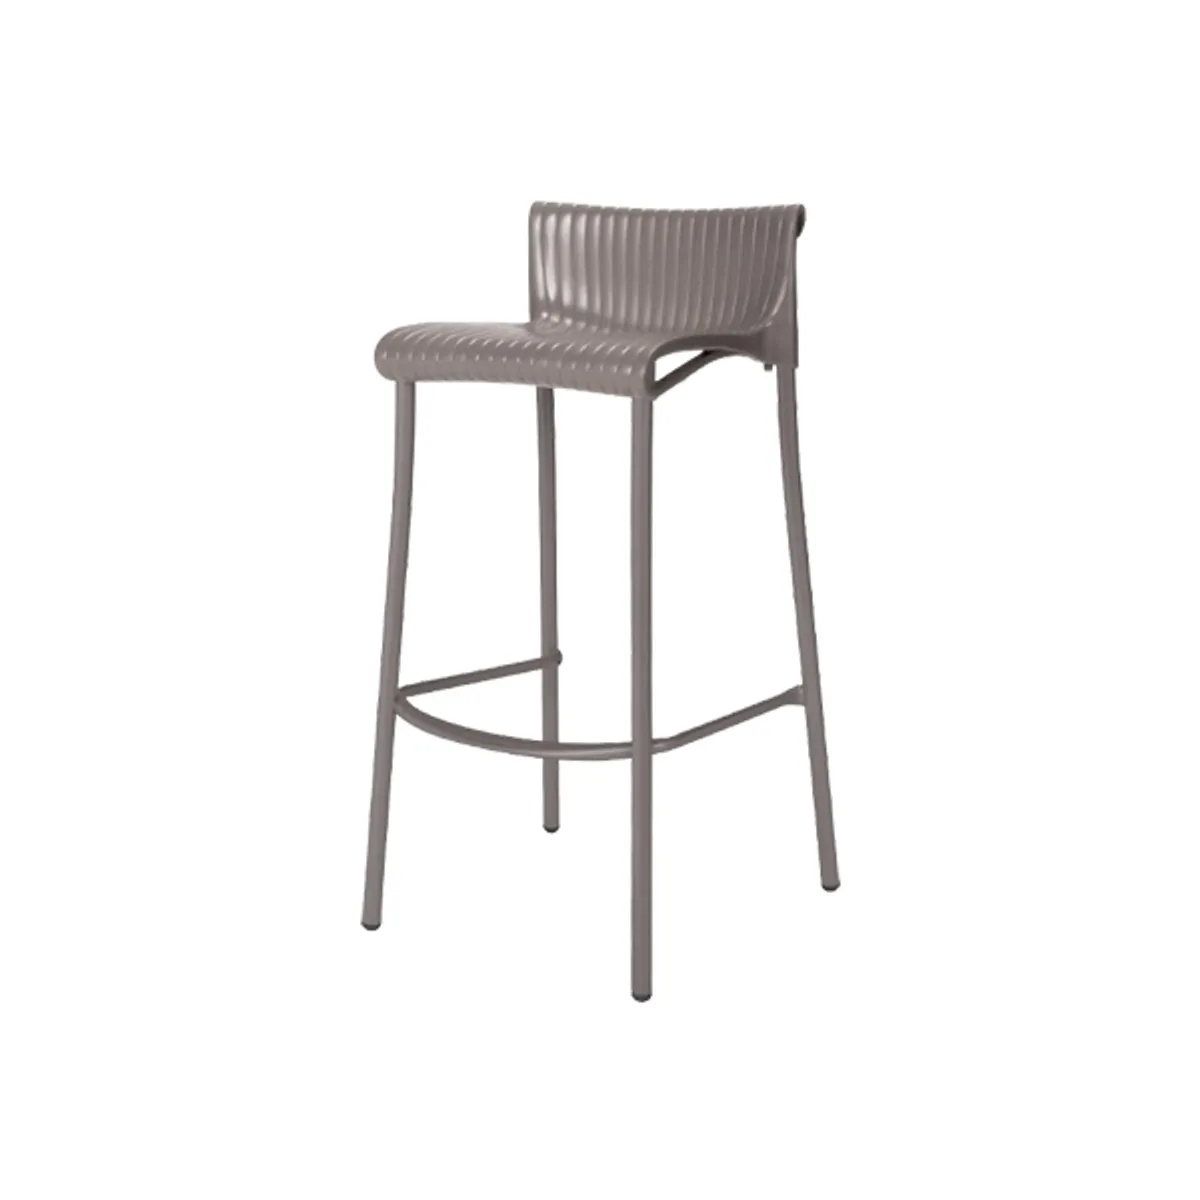 Duca bar stool Inside Out Contracts